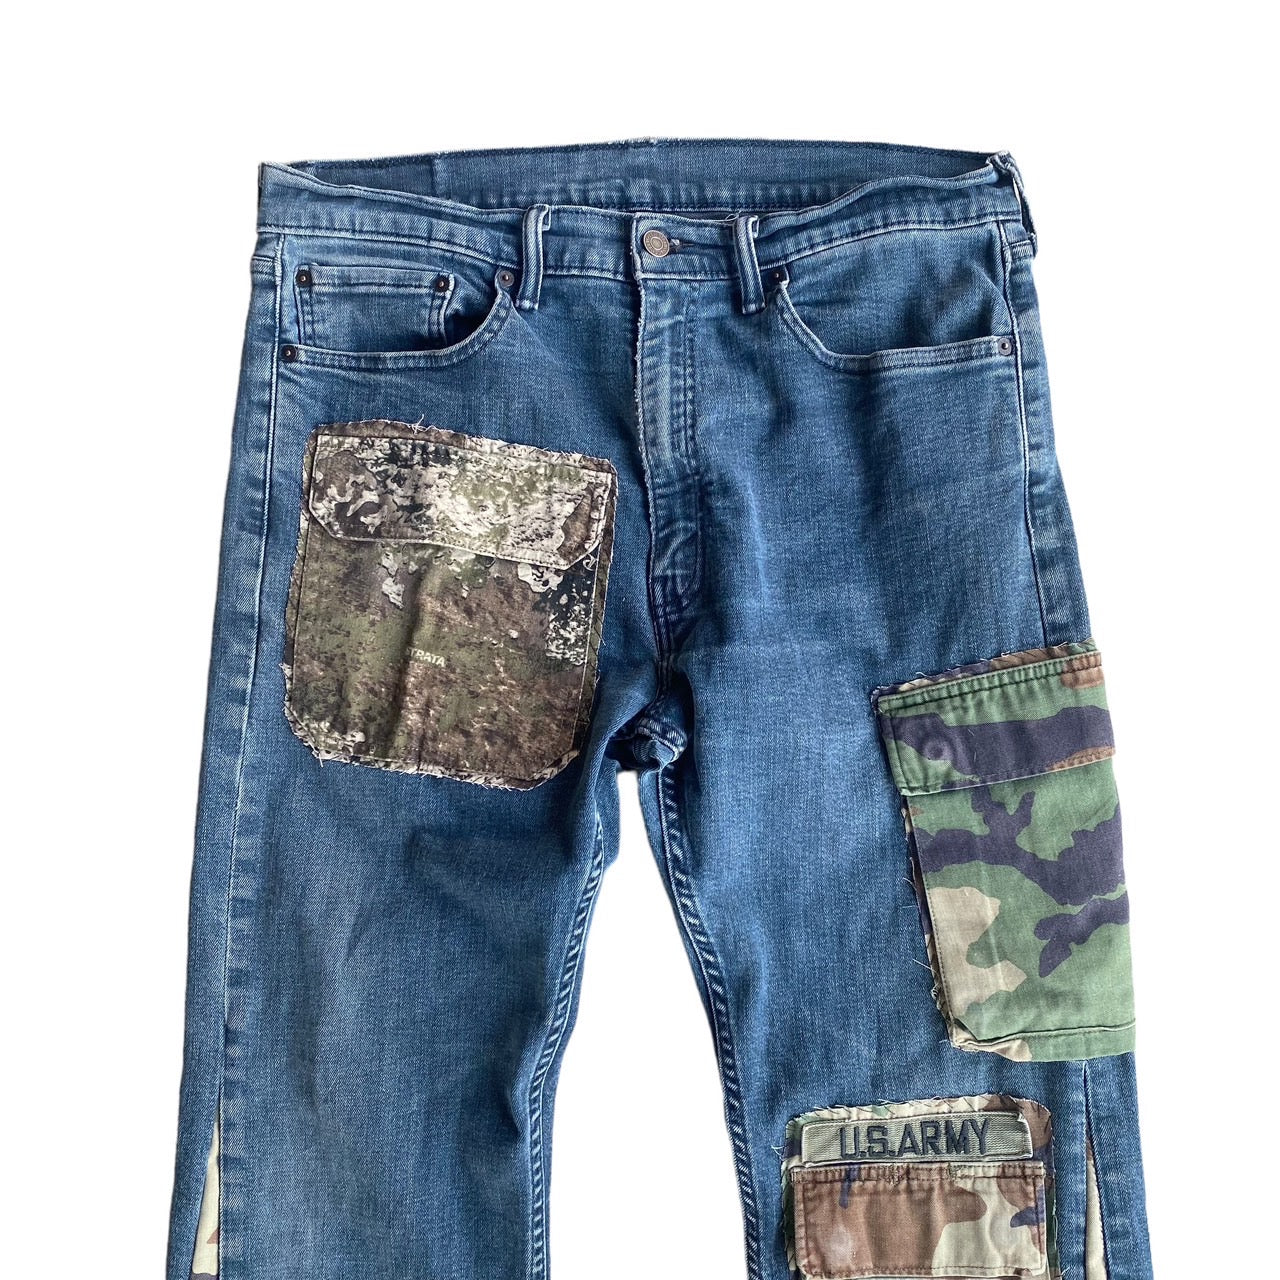 Levi's 505 Custom Reworked Flare Panel Camo Pocket Blue Jeans by Archive.Grn